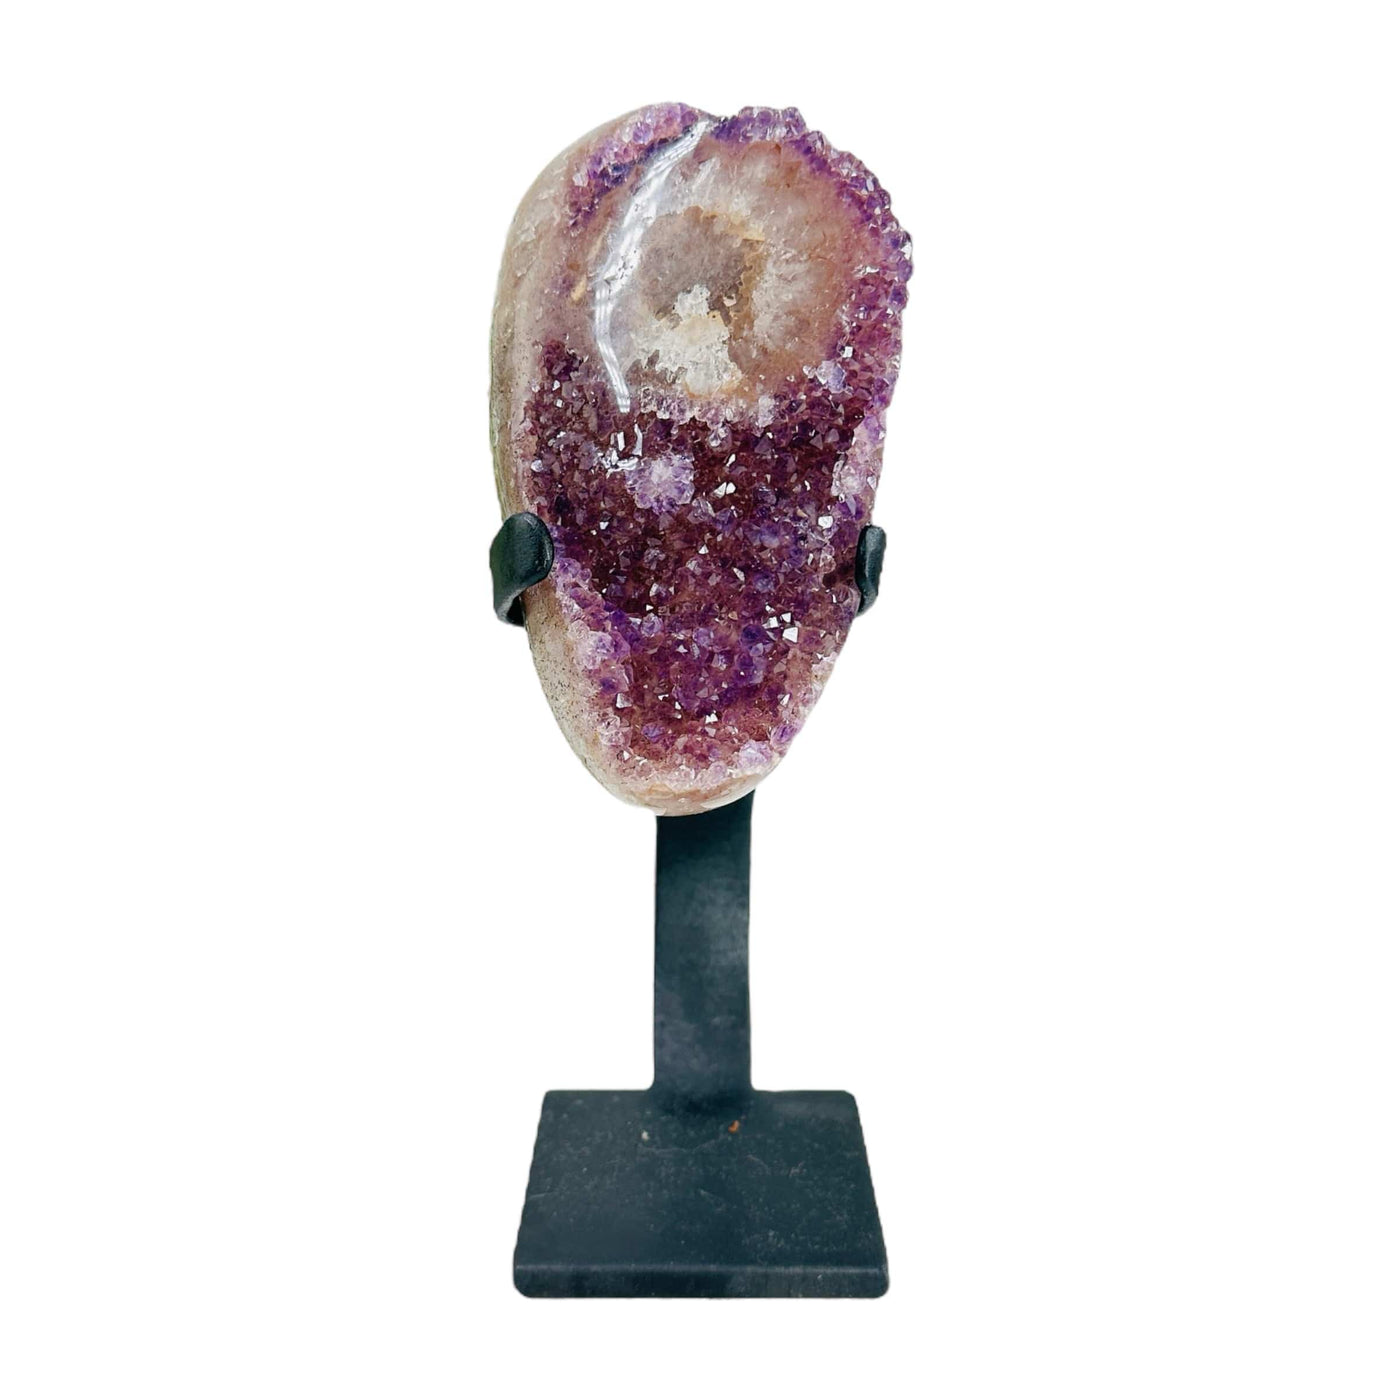 amethyst on stand on white background